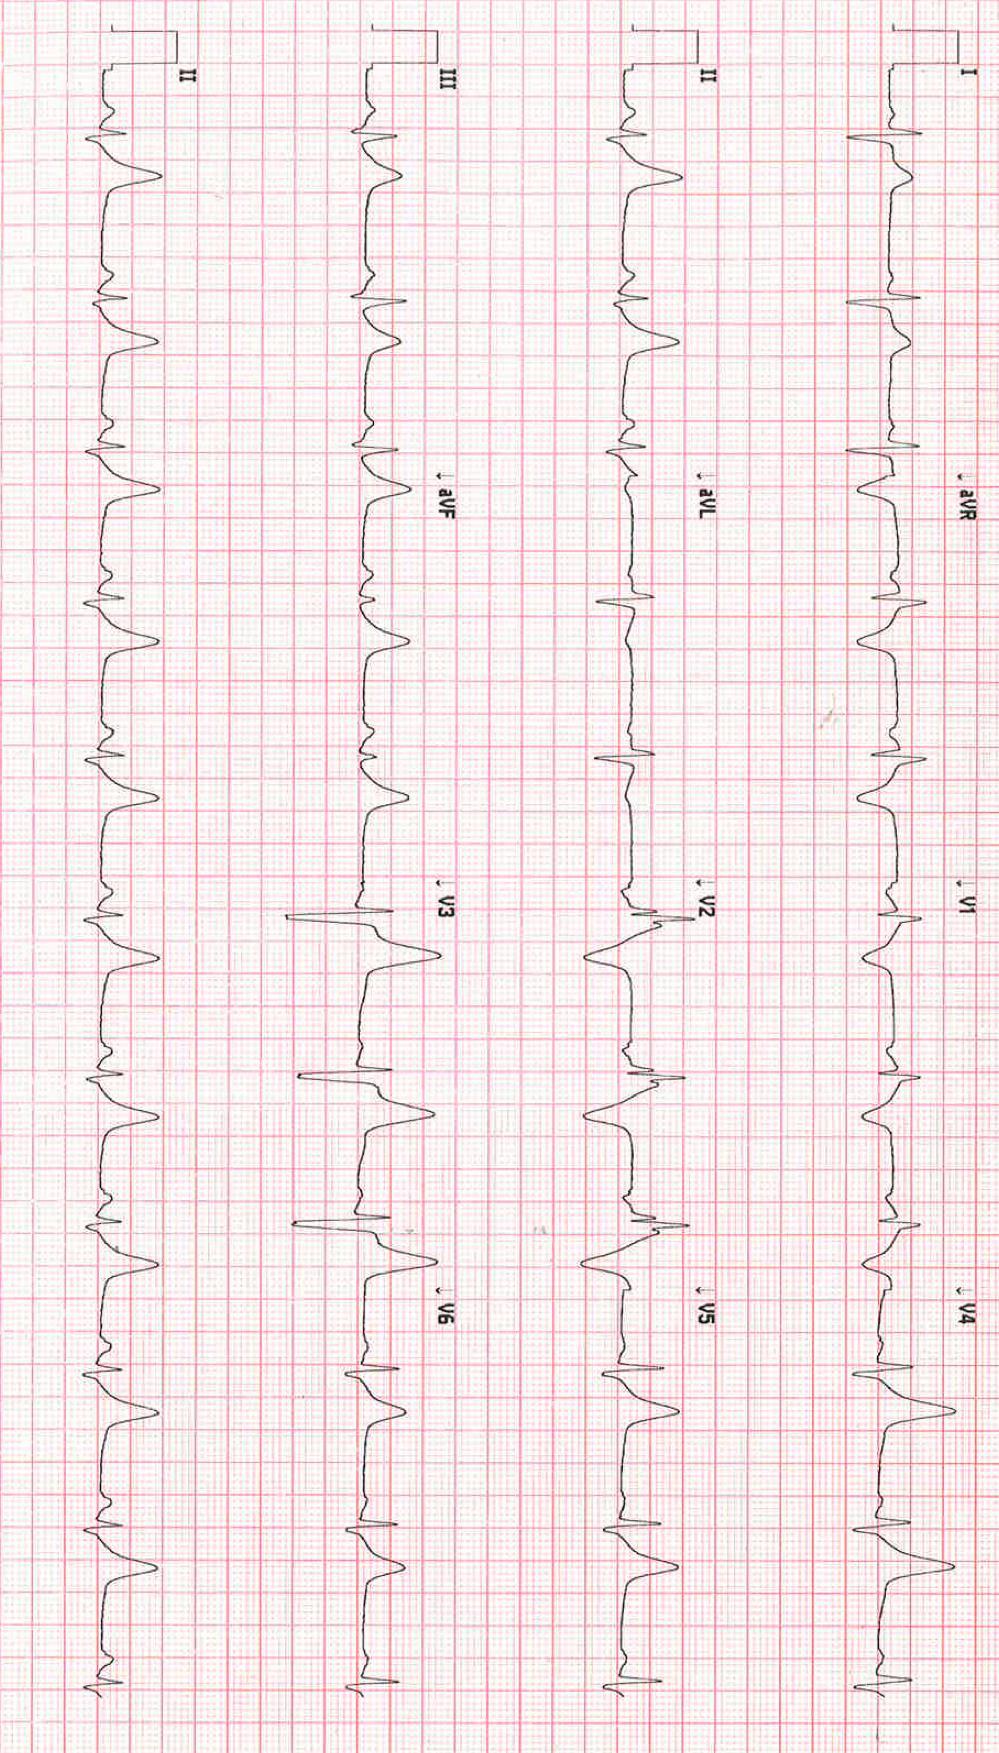 ECG 6 41 yr old male resuscitated from VF next step?